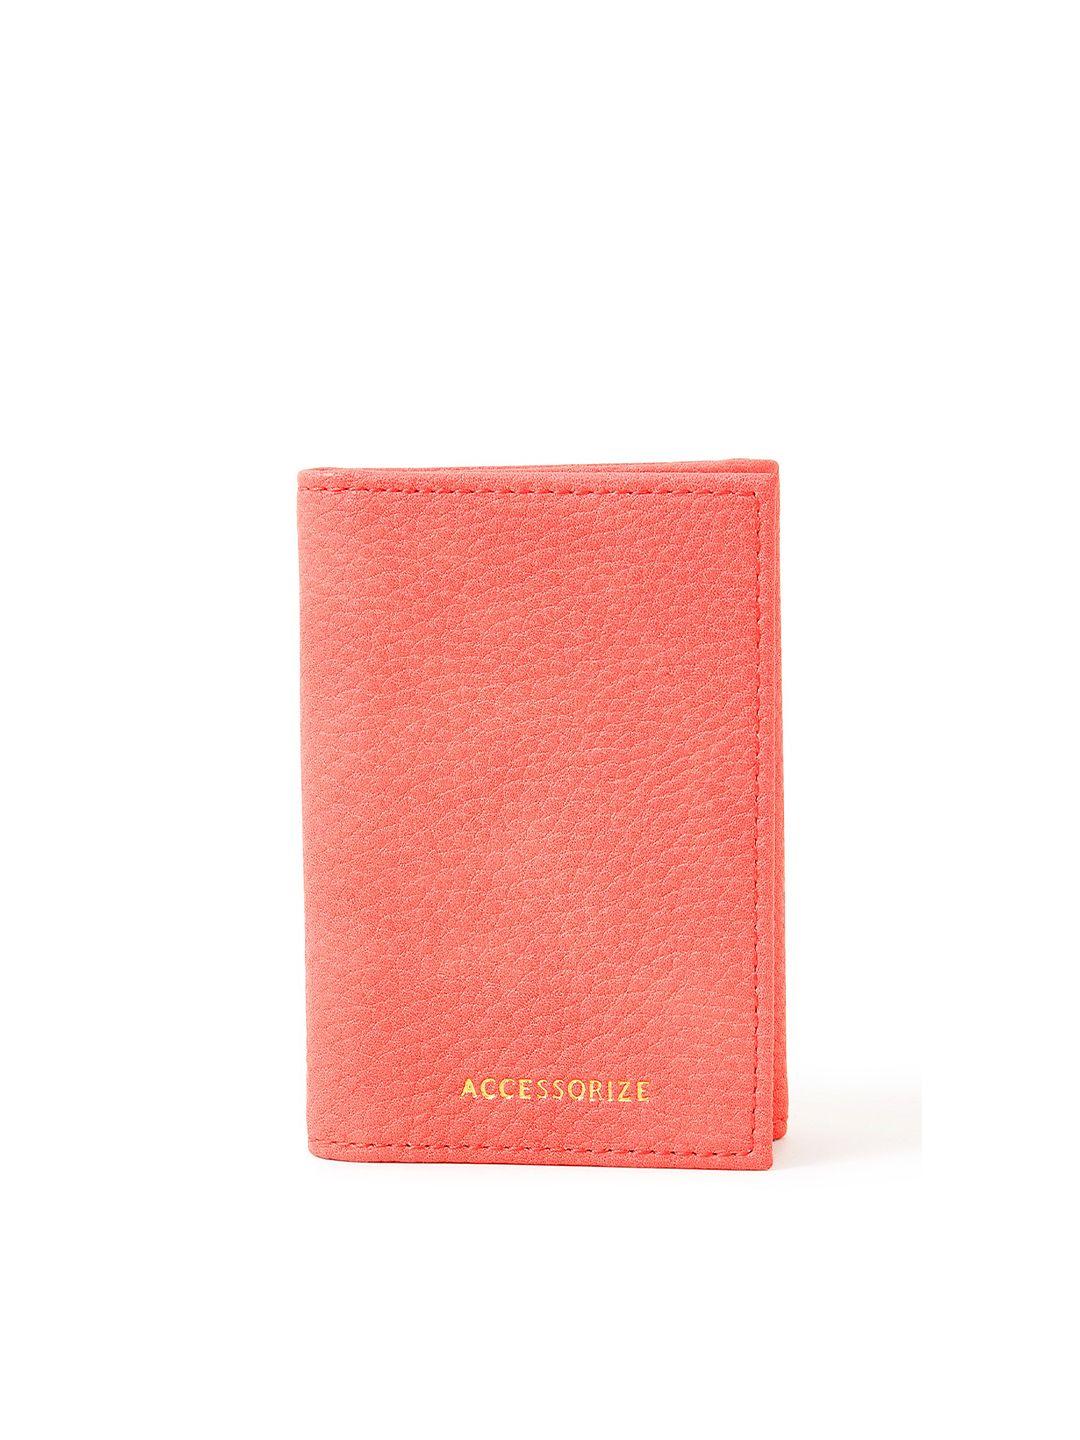 accessorize london faux leather travel card holder